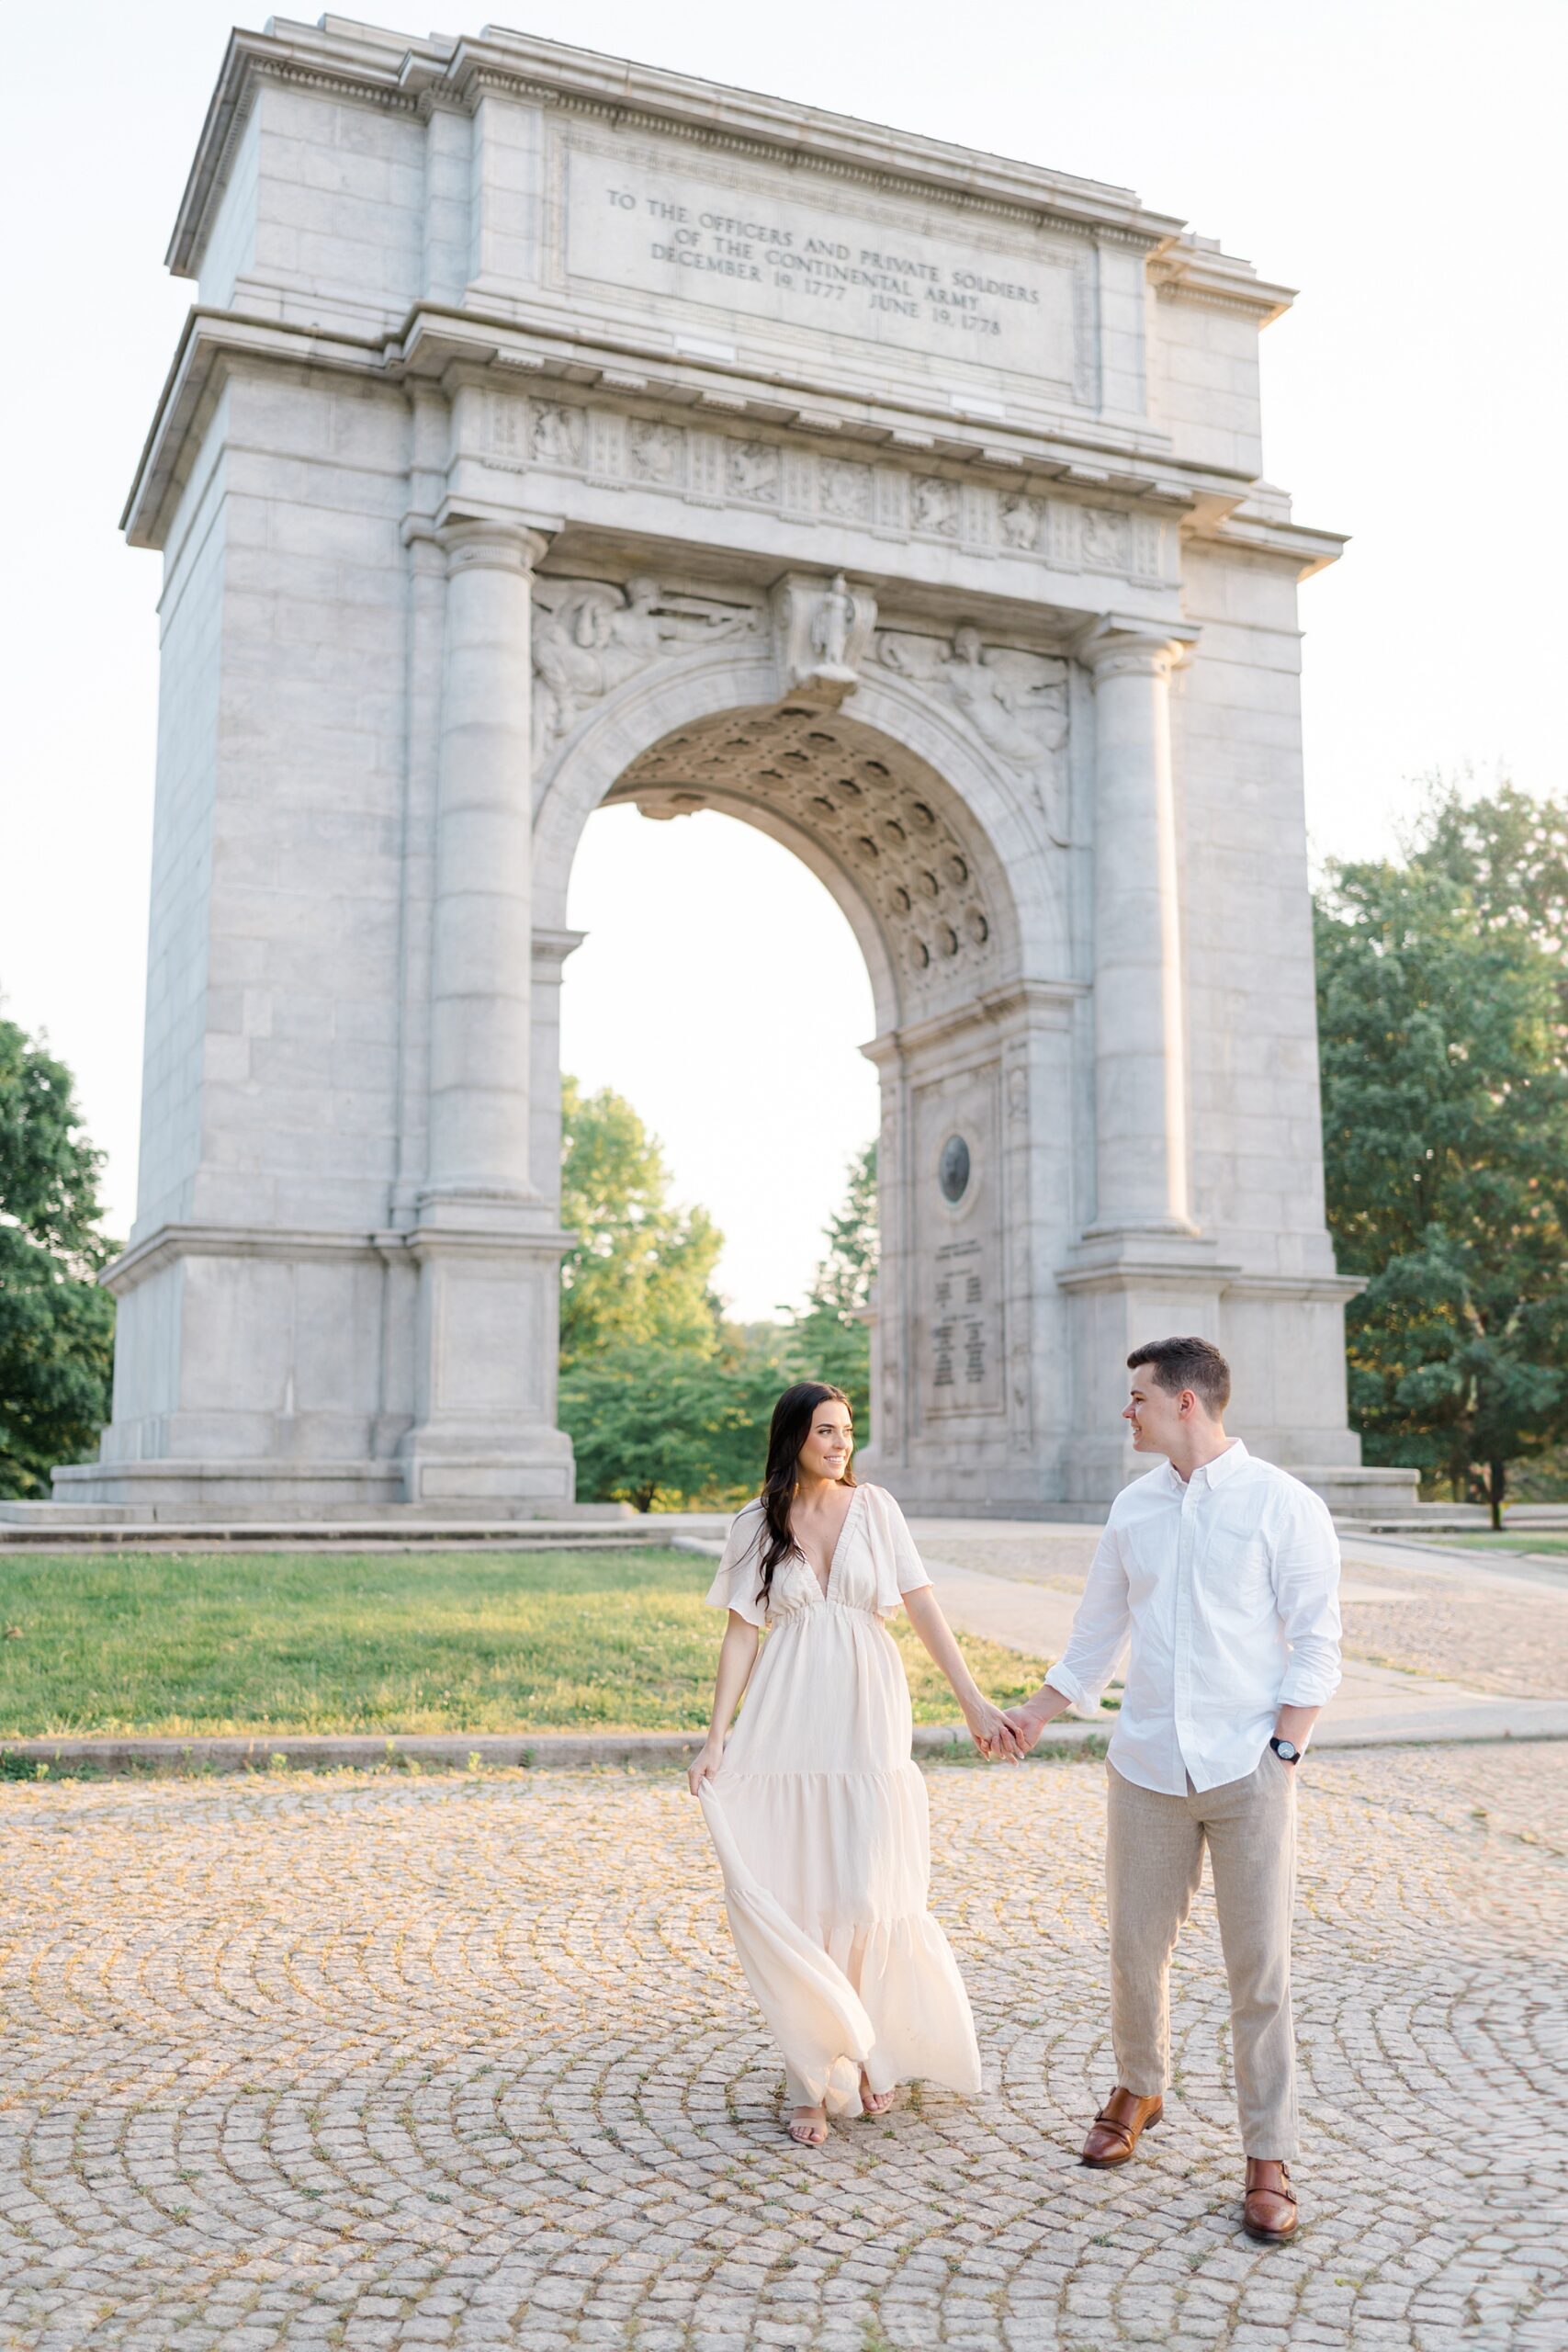 engaged couple hold hands as they walk in front of the National Memorial Arch at Valley Forge, PA